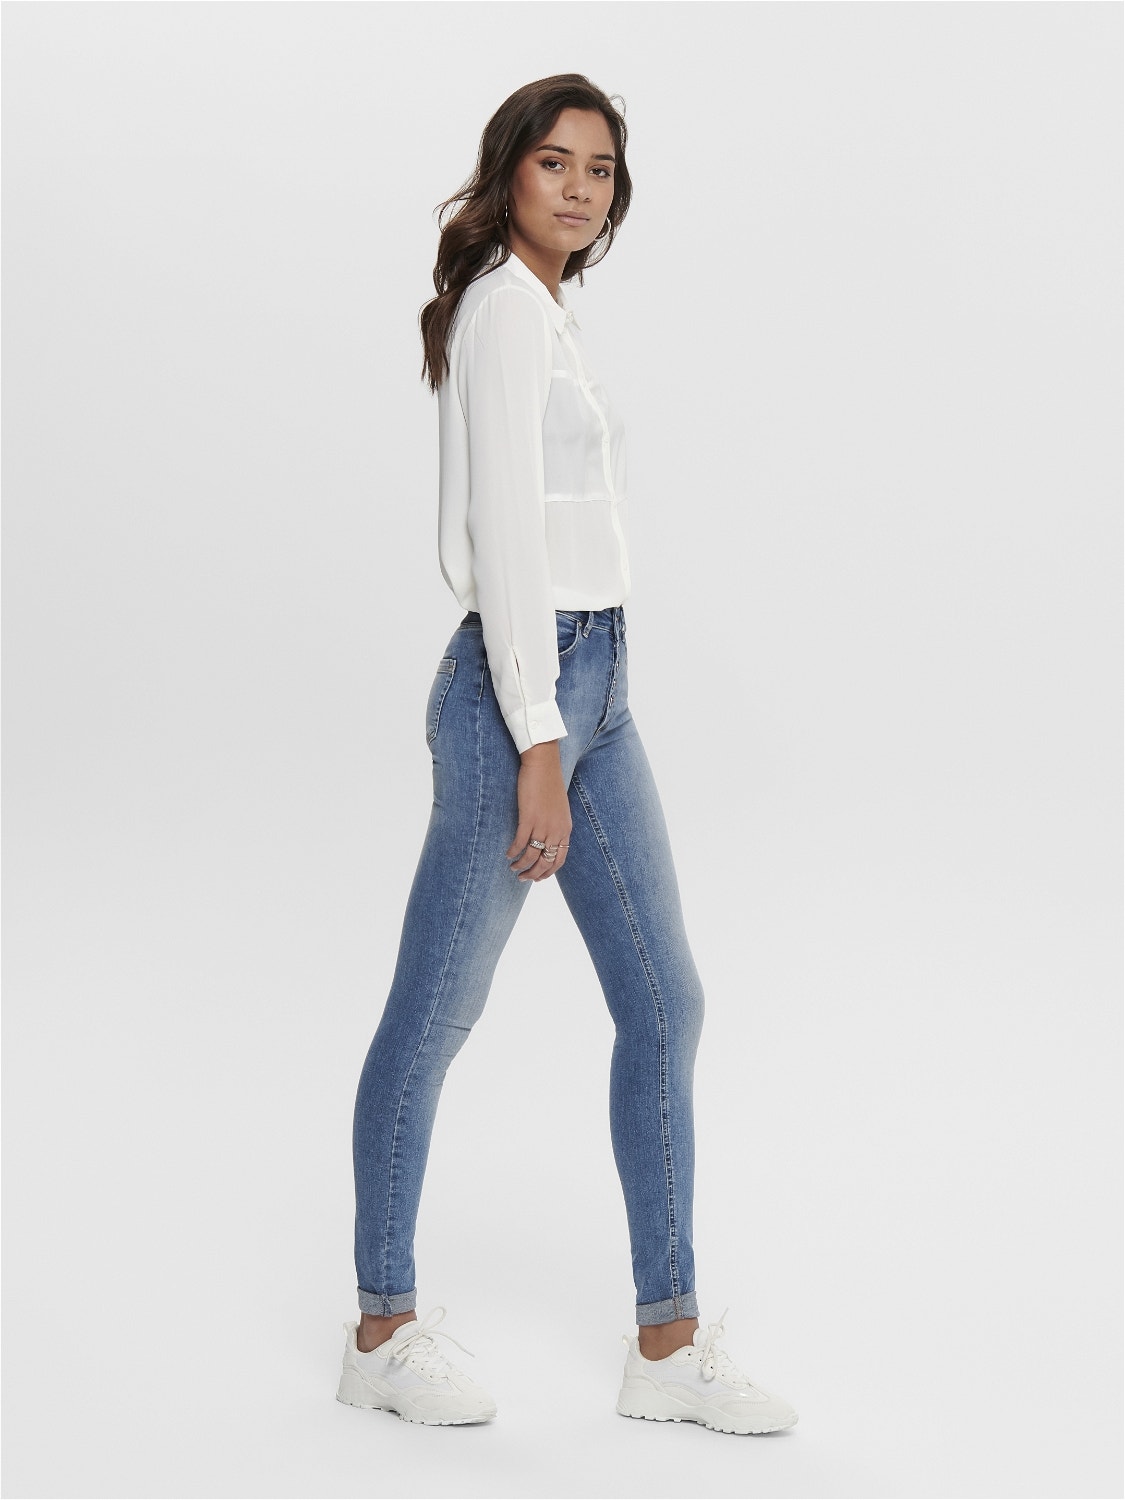 ONLY Skinny Fit Hohe Taille Jeans -Medium Blue Denim - 15219811